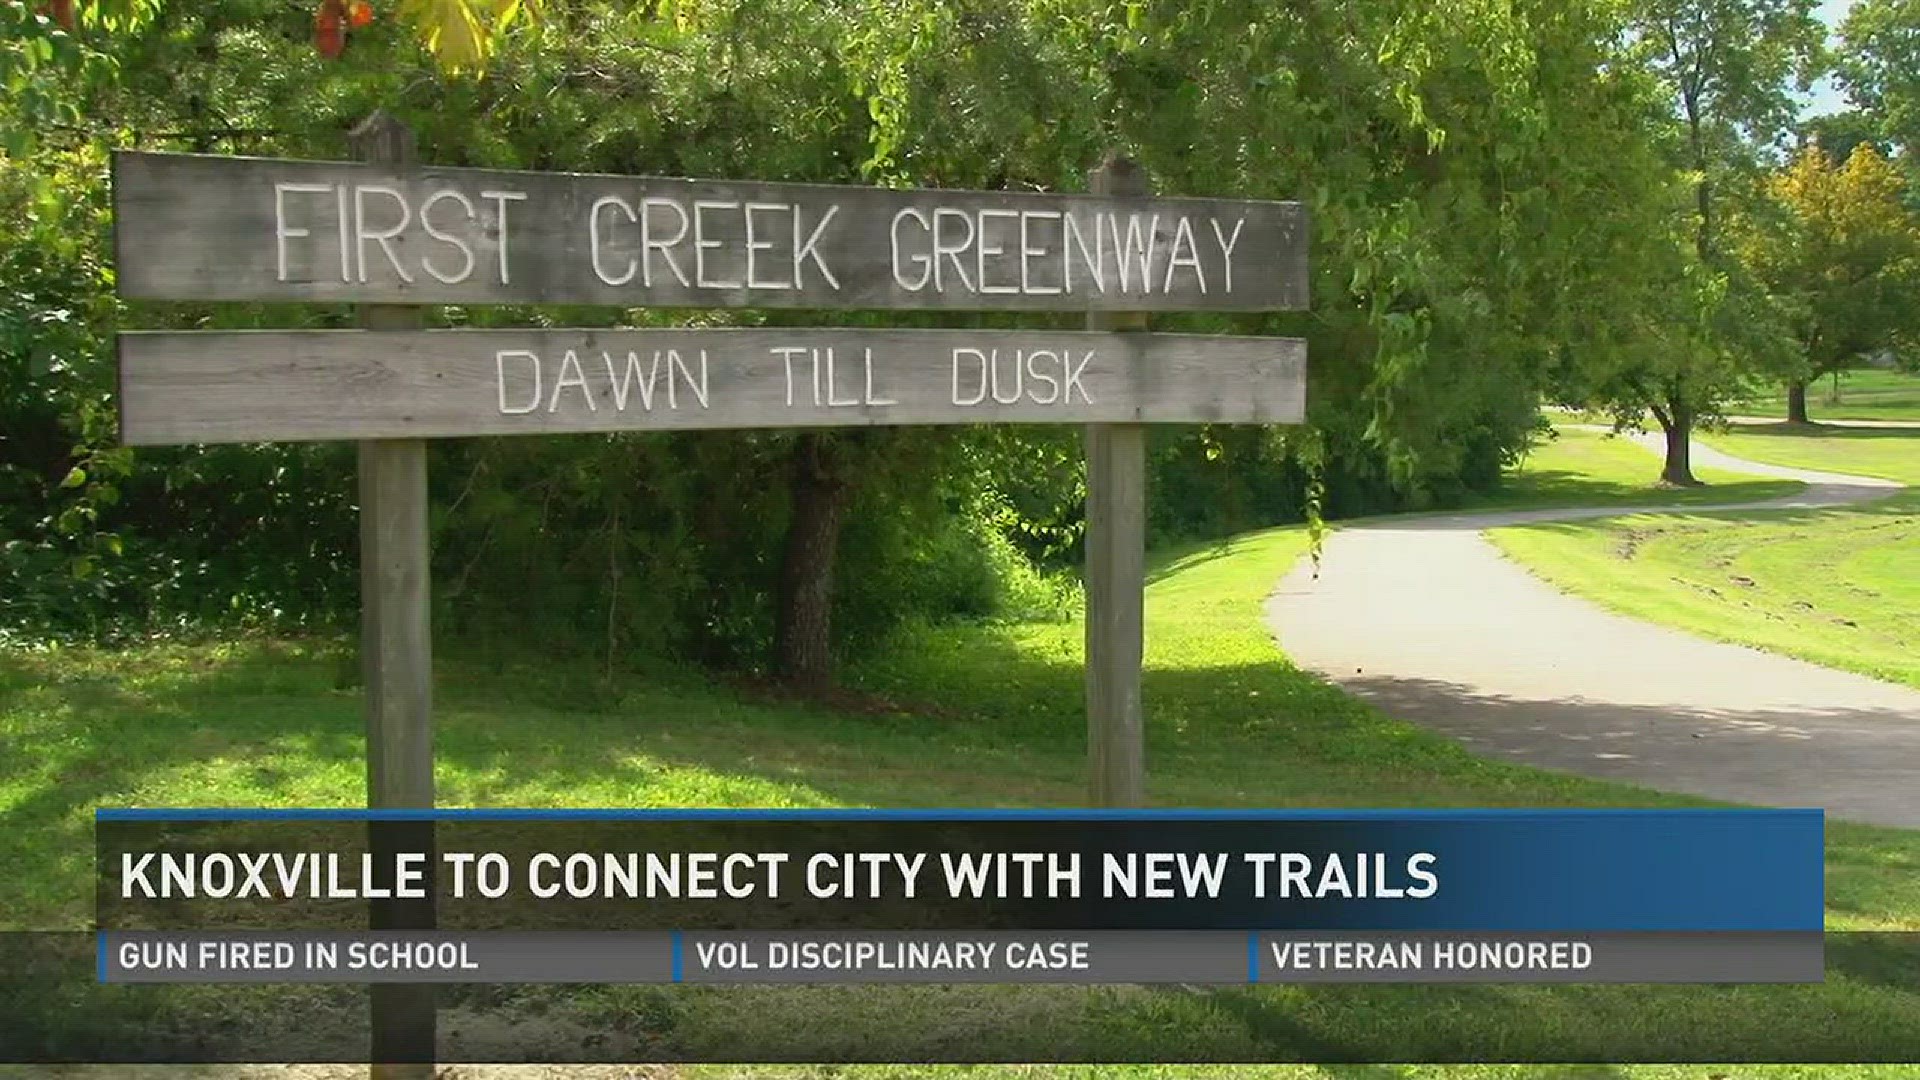 City leaders revealed a $45 million plan to build 24 miles of new greenways that will connect existing trails. August 11, 2016.